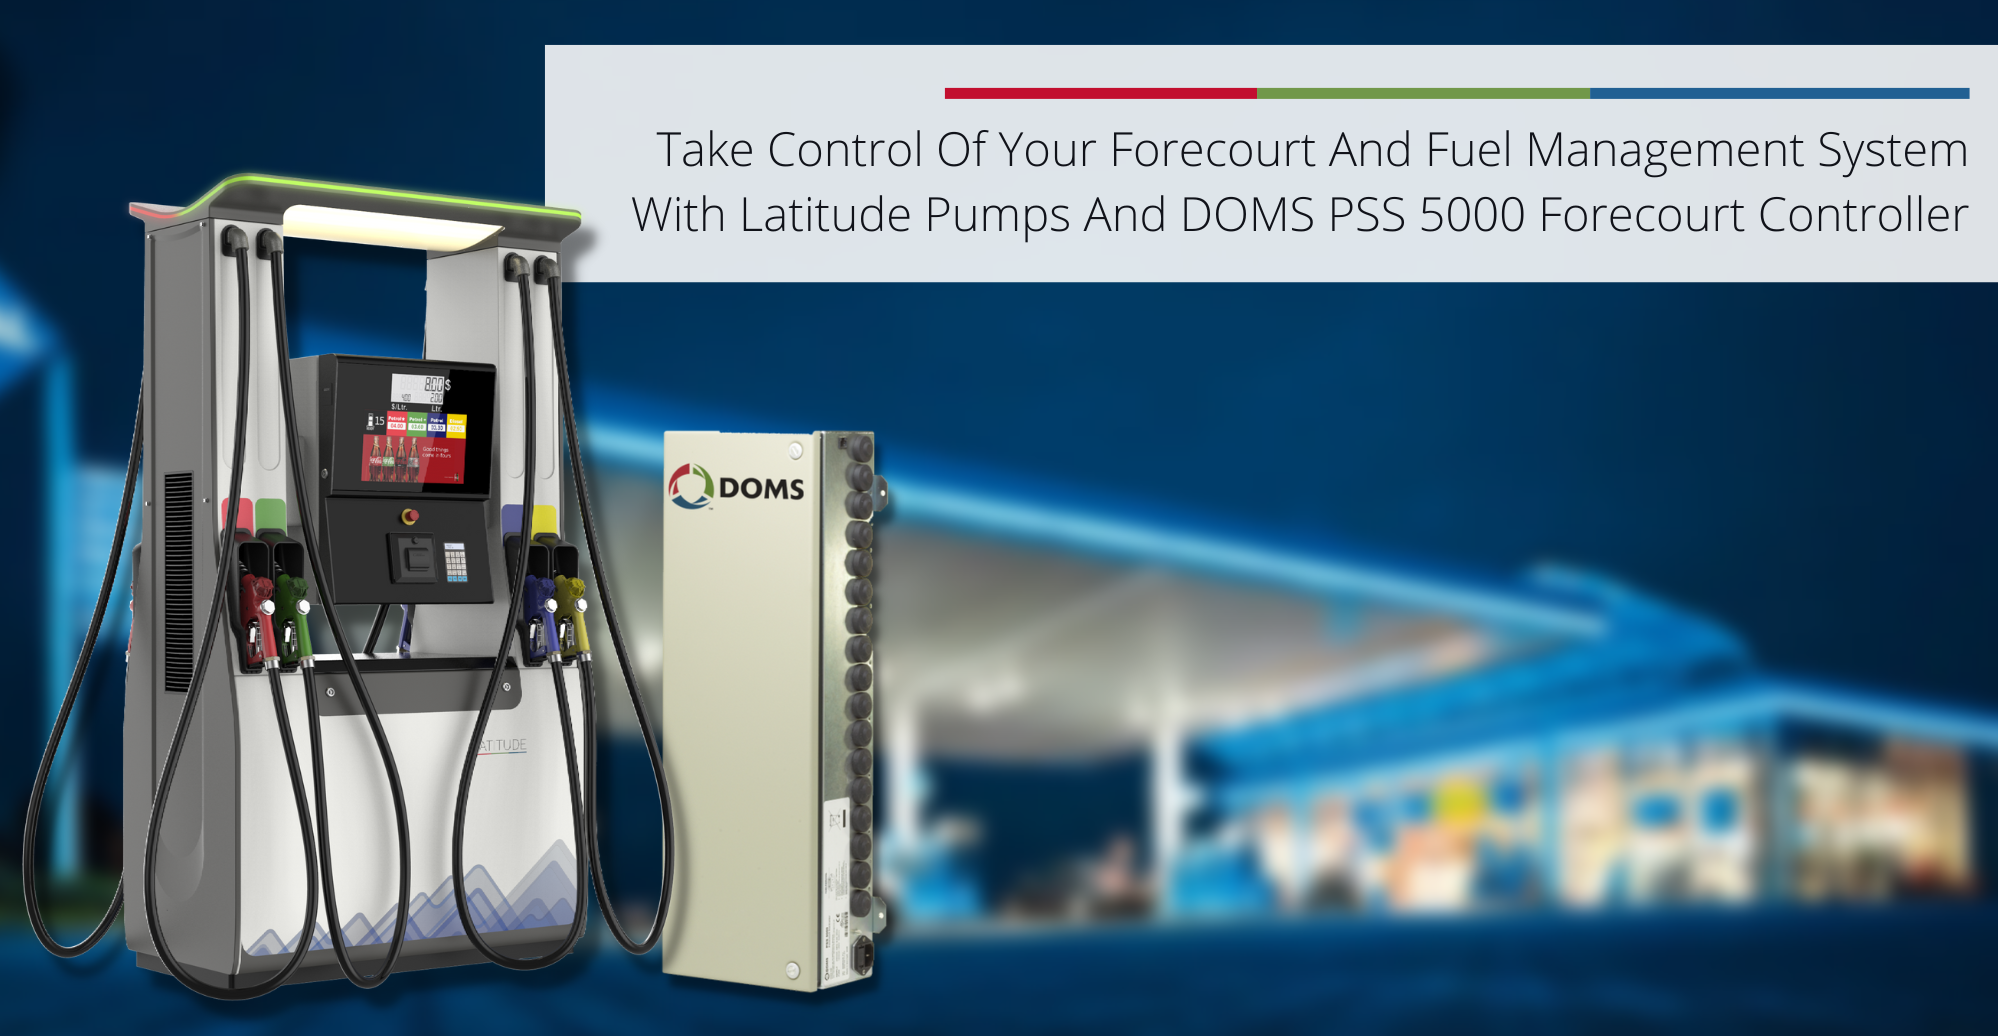 Improve and Scale Your Fuel Management System With Latitude Pumps And DOMS Forecourt Controller